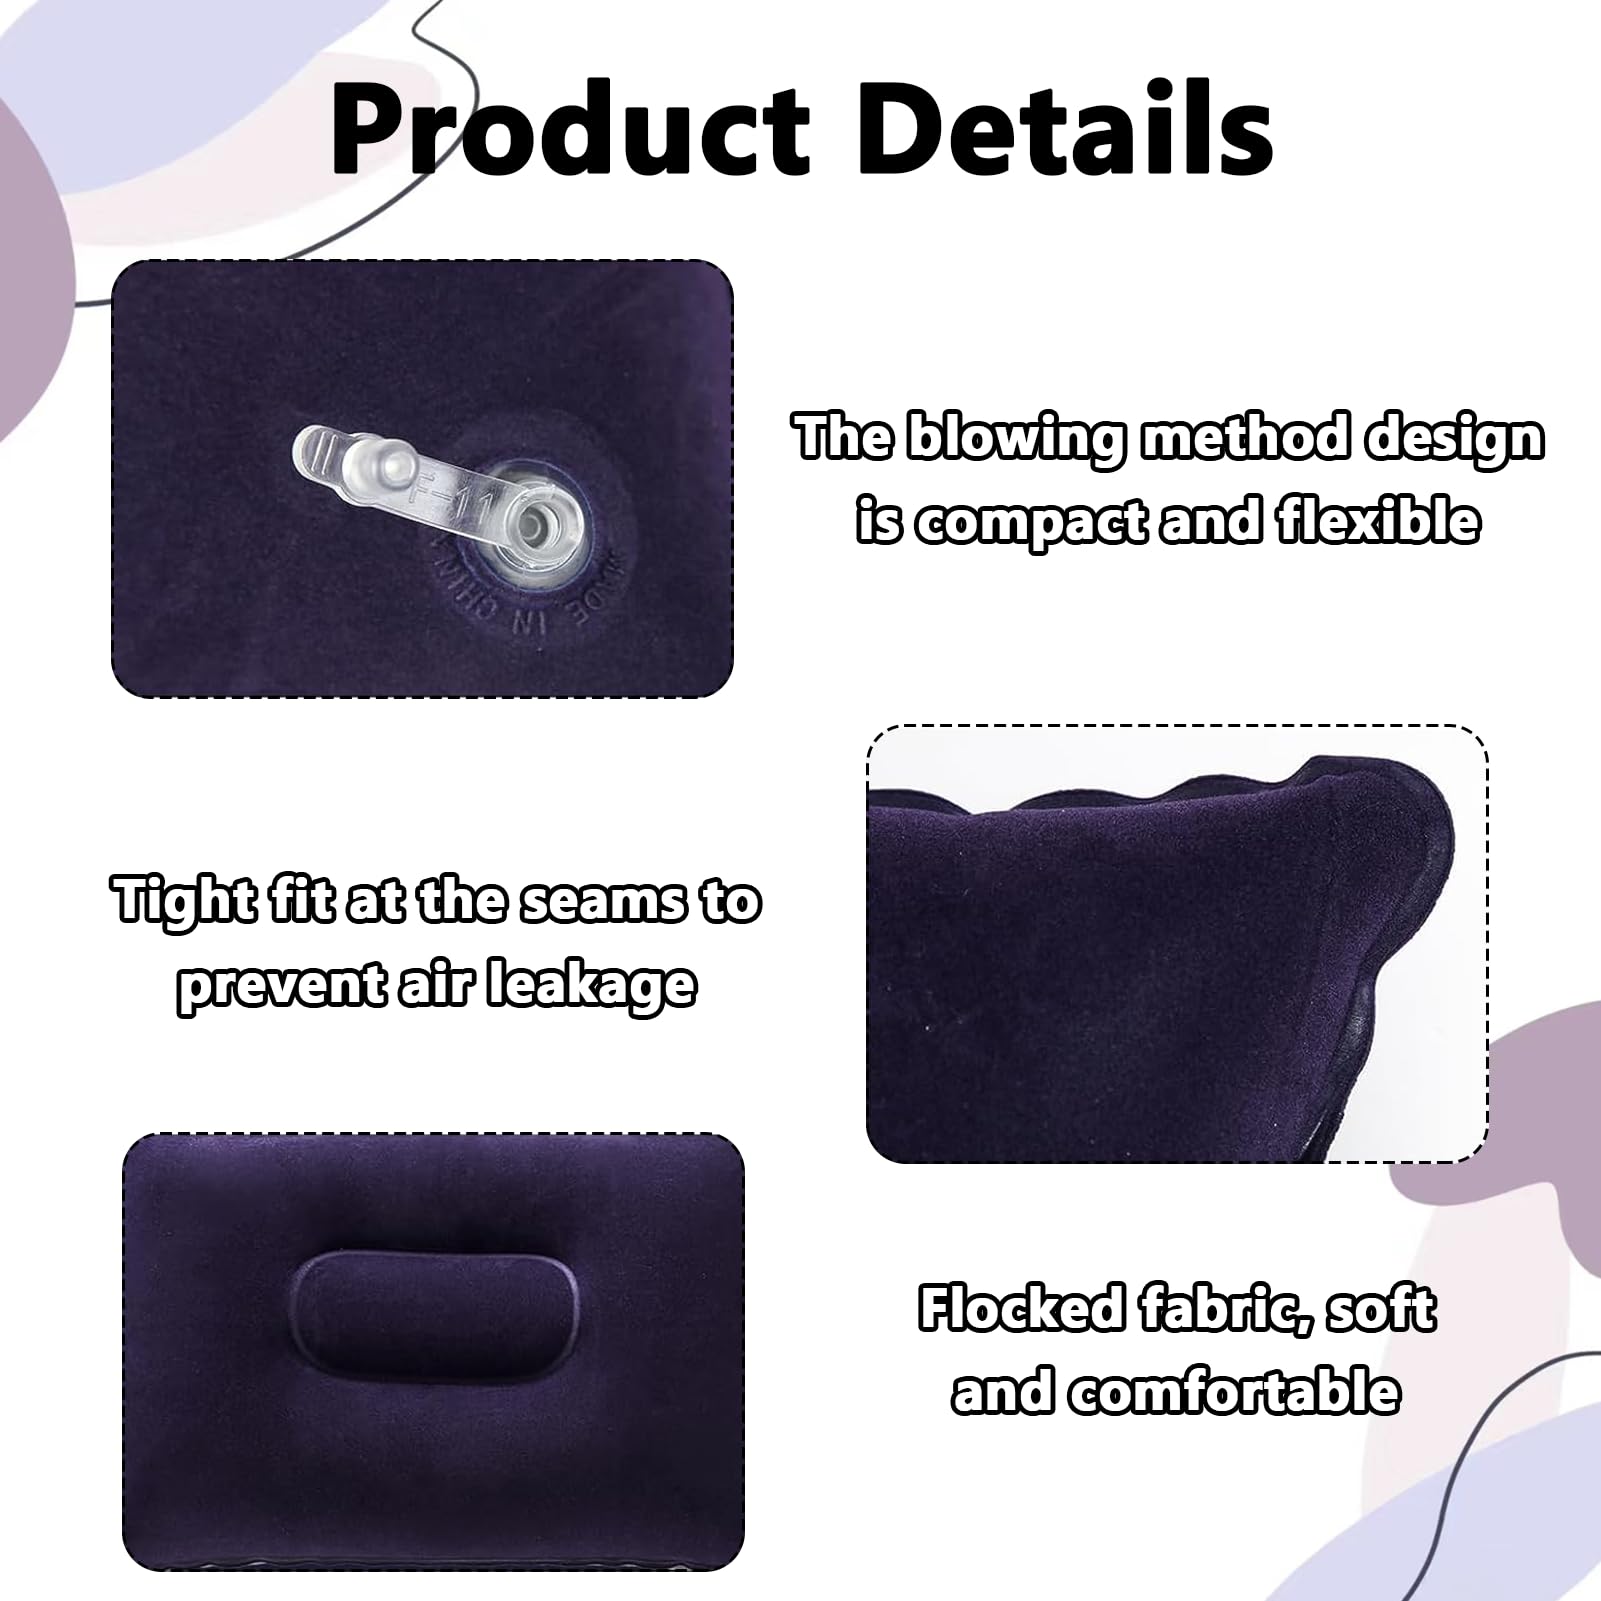 Beylos 2Pcs Portable Inflatable Pillow Soft Camping Pillow for Traveling Camping Hiking Fishing Backpacking and Office Provides Ample Space for Your Head Neck Gives You Restful Sleep (Purple)